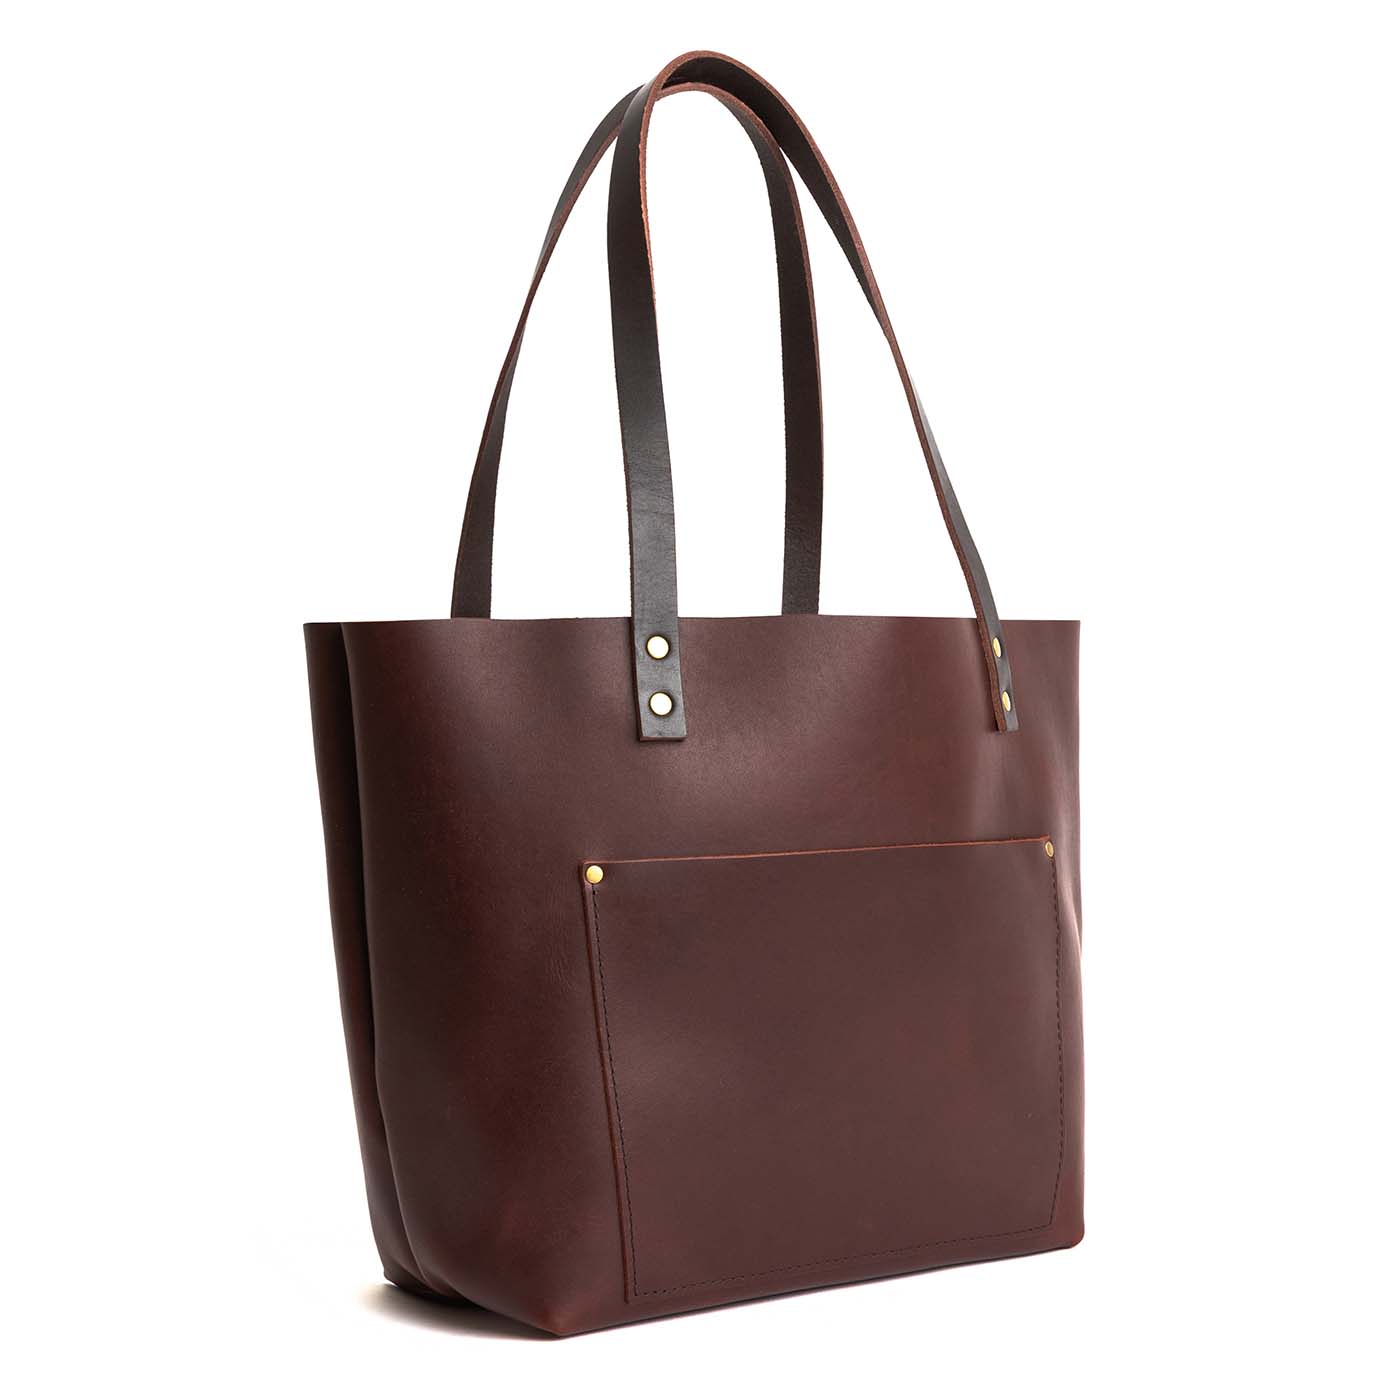 Almost Perfect' Leather Tote Bag, Cognac / Classic / Oversized